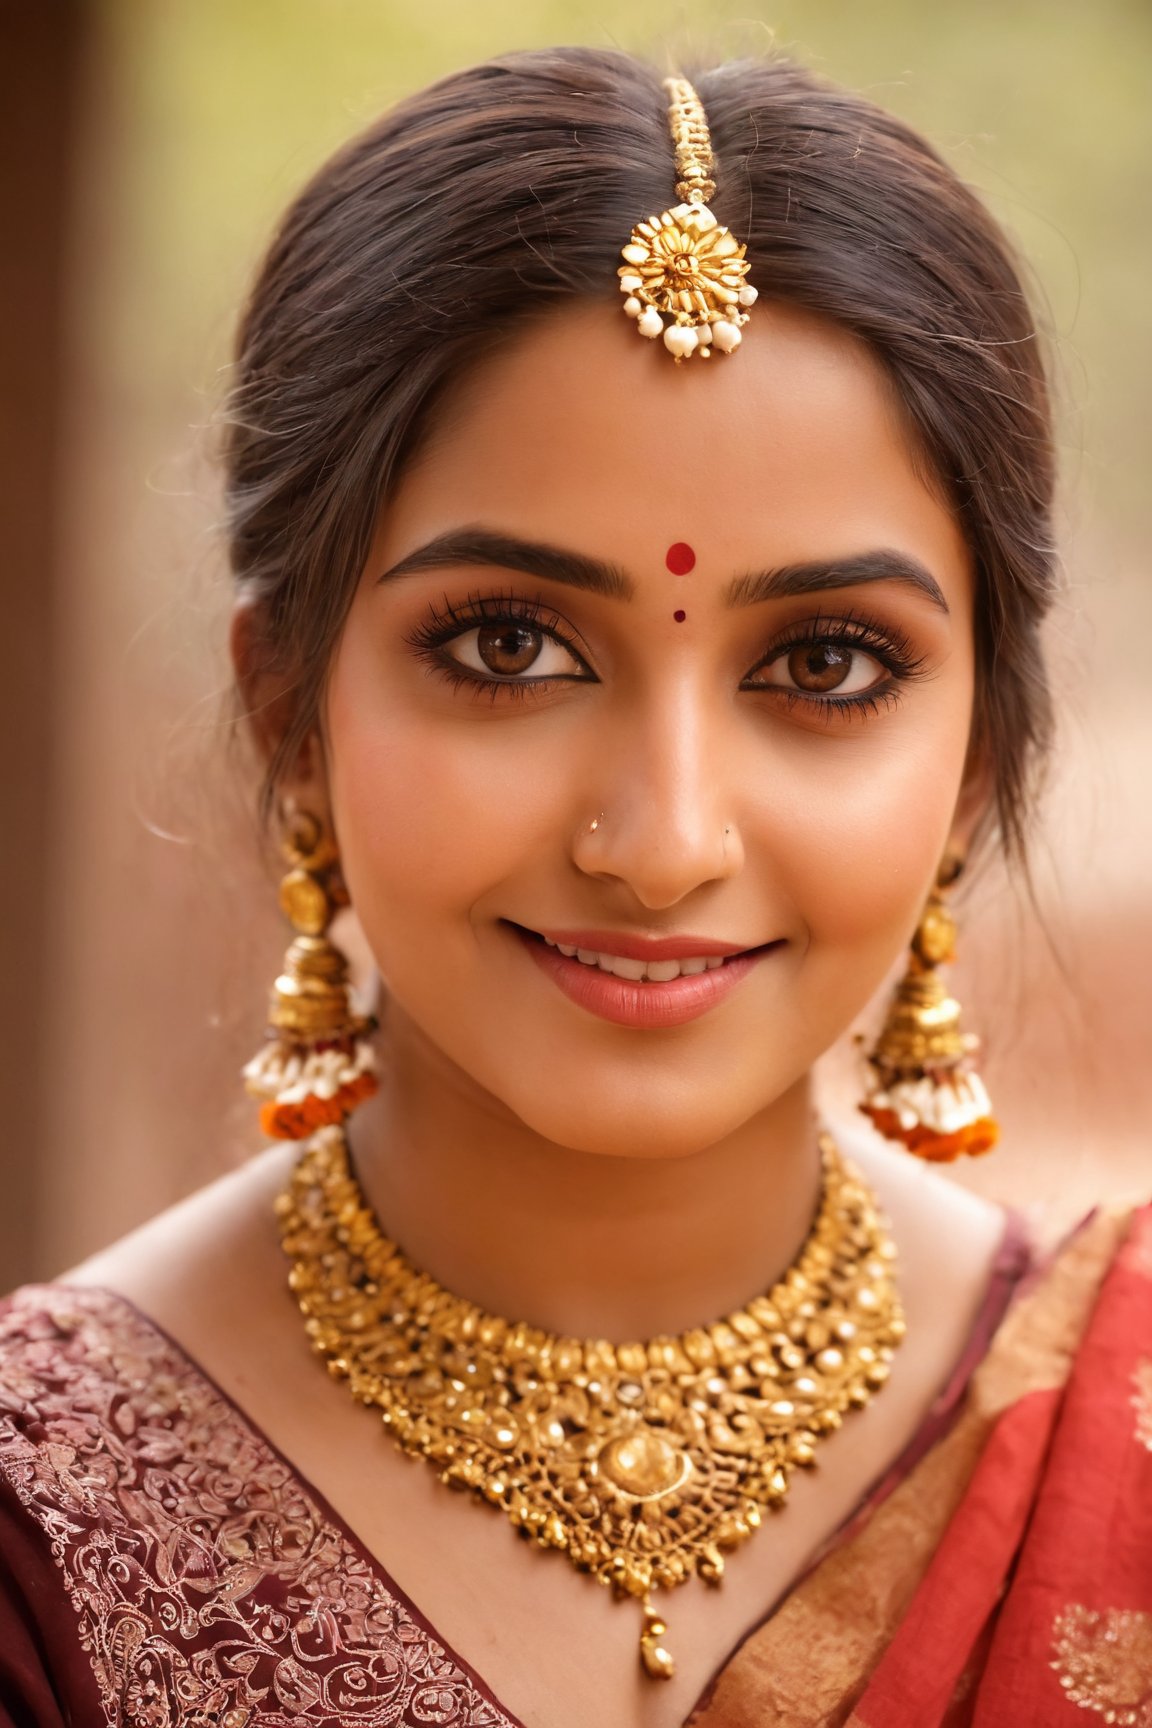 (best quality,4k,8k,highres,masterpiece:1.2),ultra-detailed,(realistic,photorealistic,photo-realistic:1.37),indian woman,beautiful detailed eyes,detailed nose,beautiful detailed lips,long black hair,brown skin,vibrant colors,natural lighting,outdoor background,portrait,traditional clothing,ornate jewelry,serene expression,soft breeze,graceful pose,Cultural elements,fine brush strokes,traditional indian patterns,harmonious color palette,feminine beauty,subtle smile,colored holi powders,dreamy atmosphere,foliage as backdrop,natural sunlight streaming,ethereal glow,exquisite detailing,her gaze speaks volumes,rich cultural heritage,daintily painted fingers,intricate mehendi patterns,sunset hues,radiant and confident,delicate features,red bindi,expressive eyes,midsummer festival attire,a riot of colors,pure and graceful